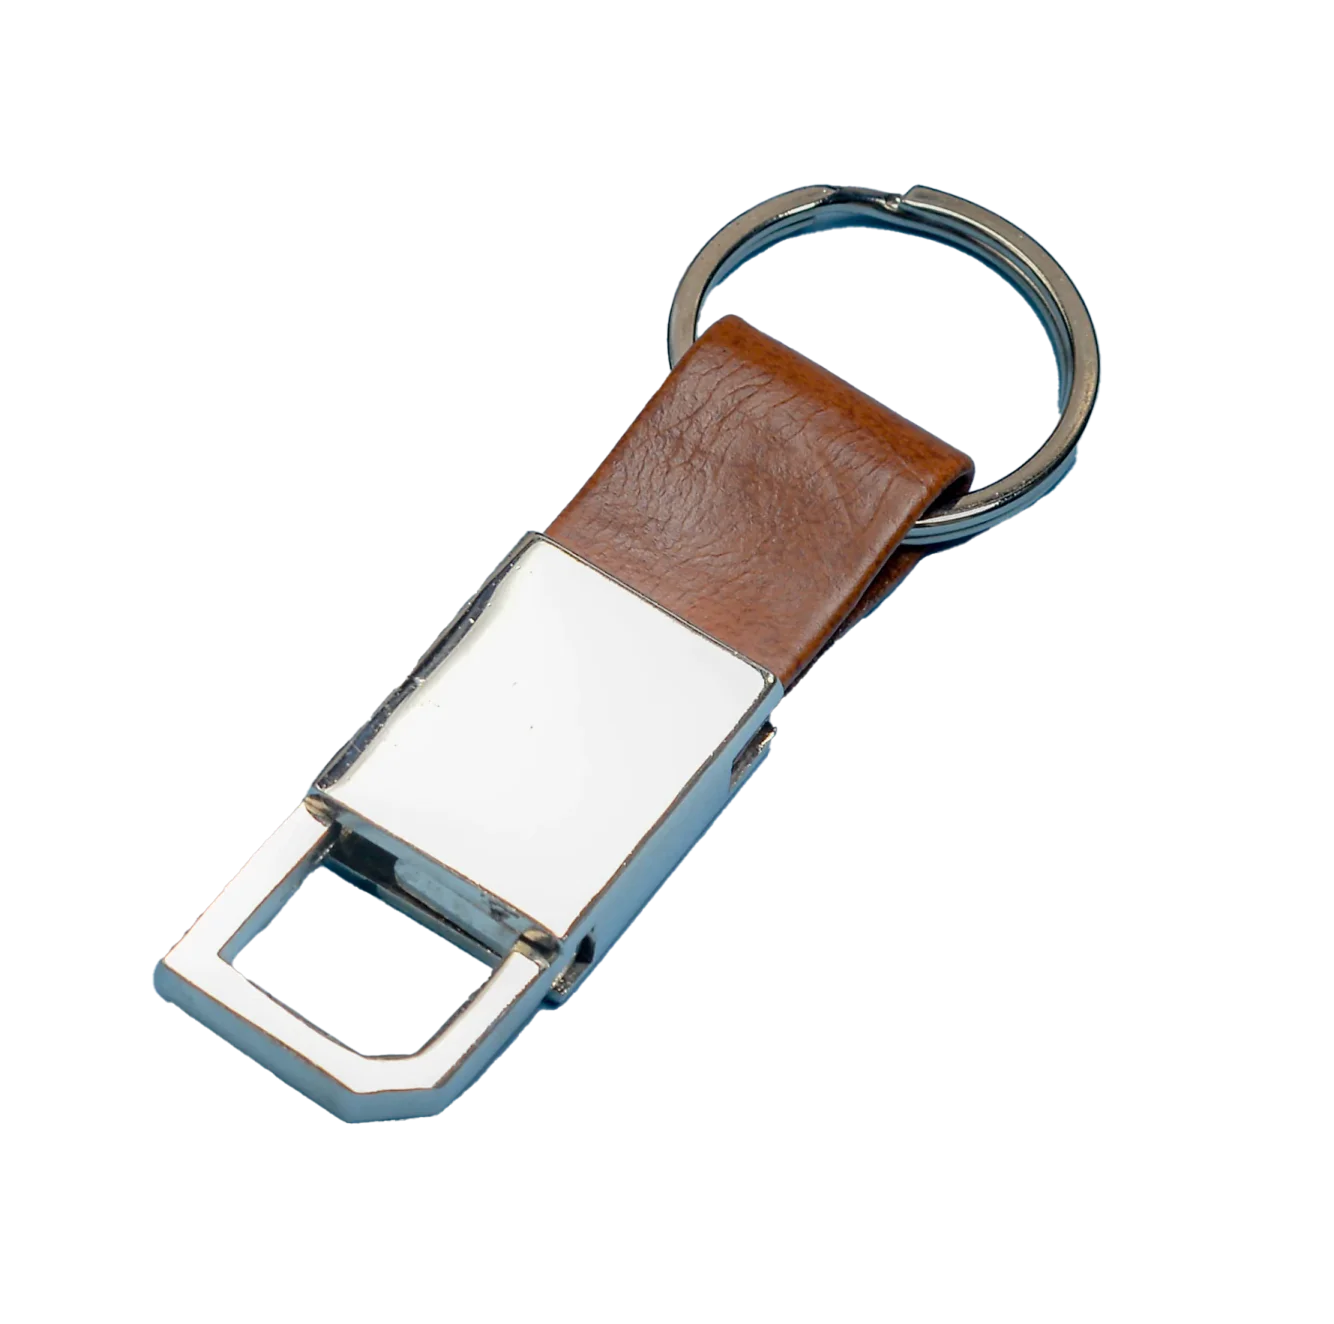 Never lose your keys again with this practical and easy-to-carry metal keychain.